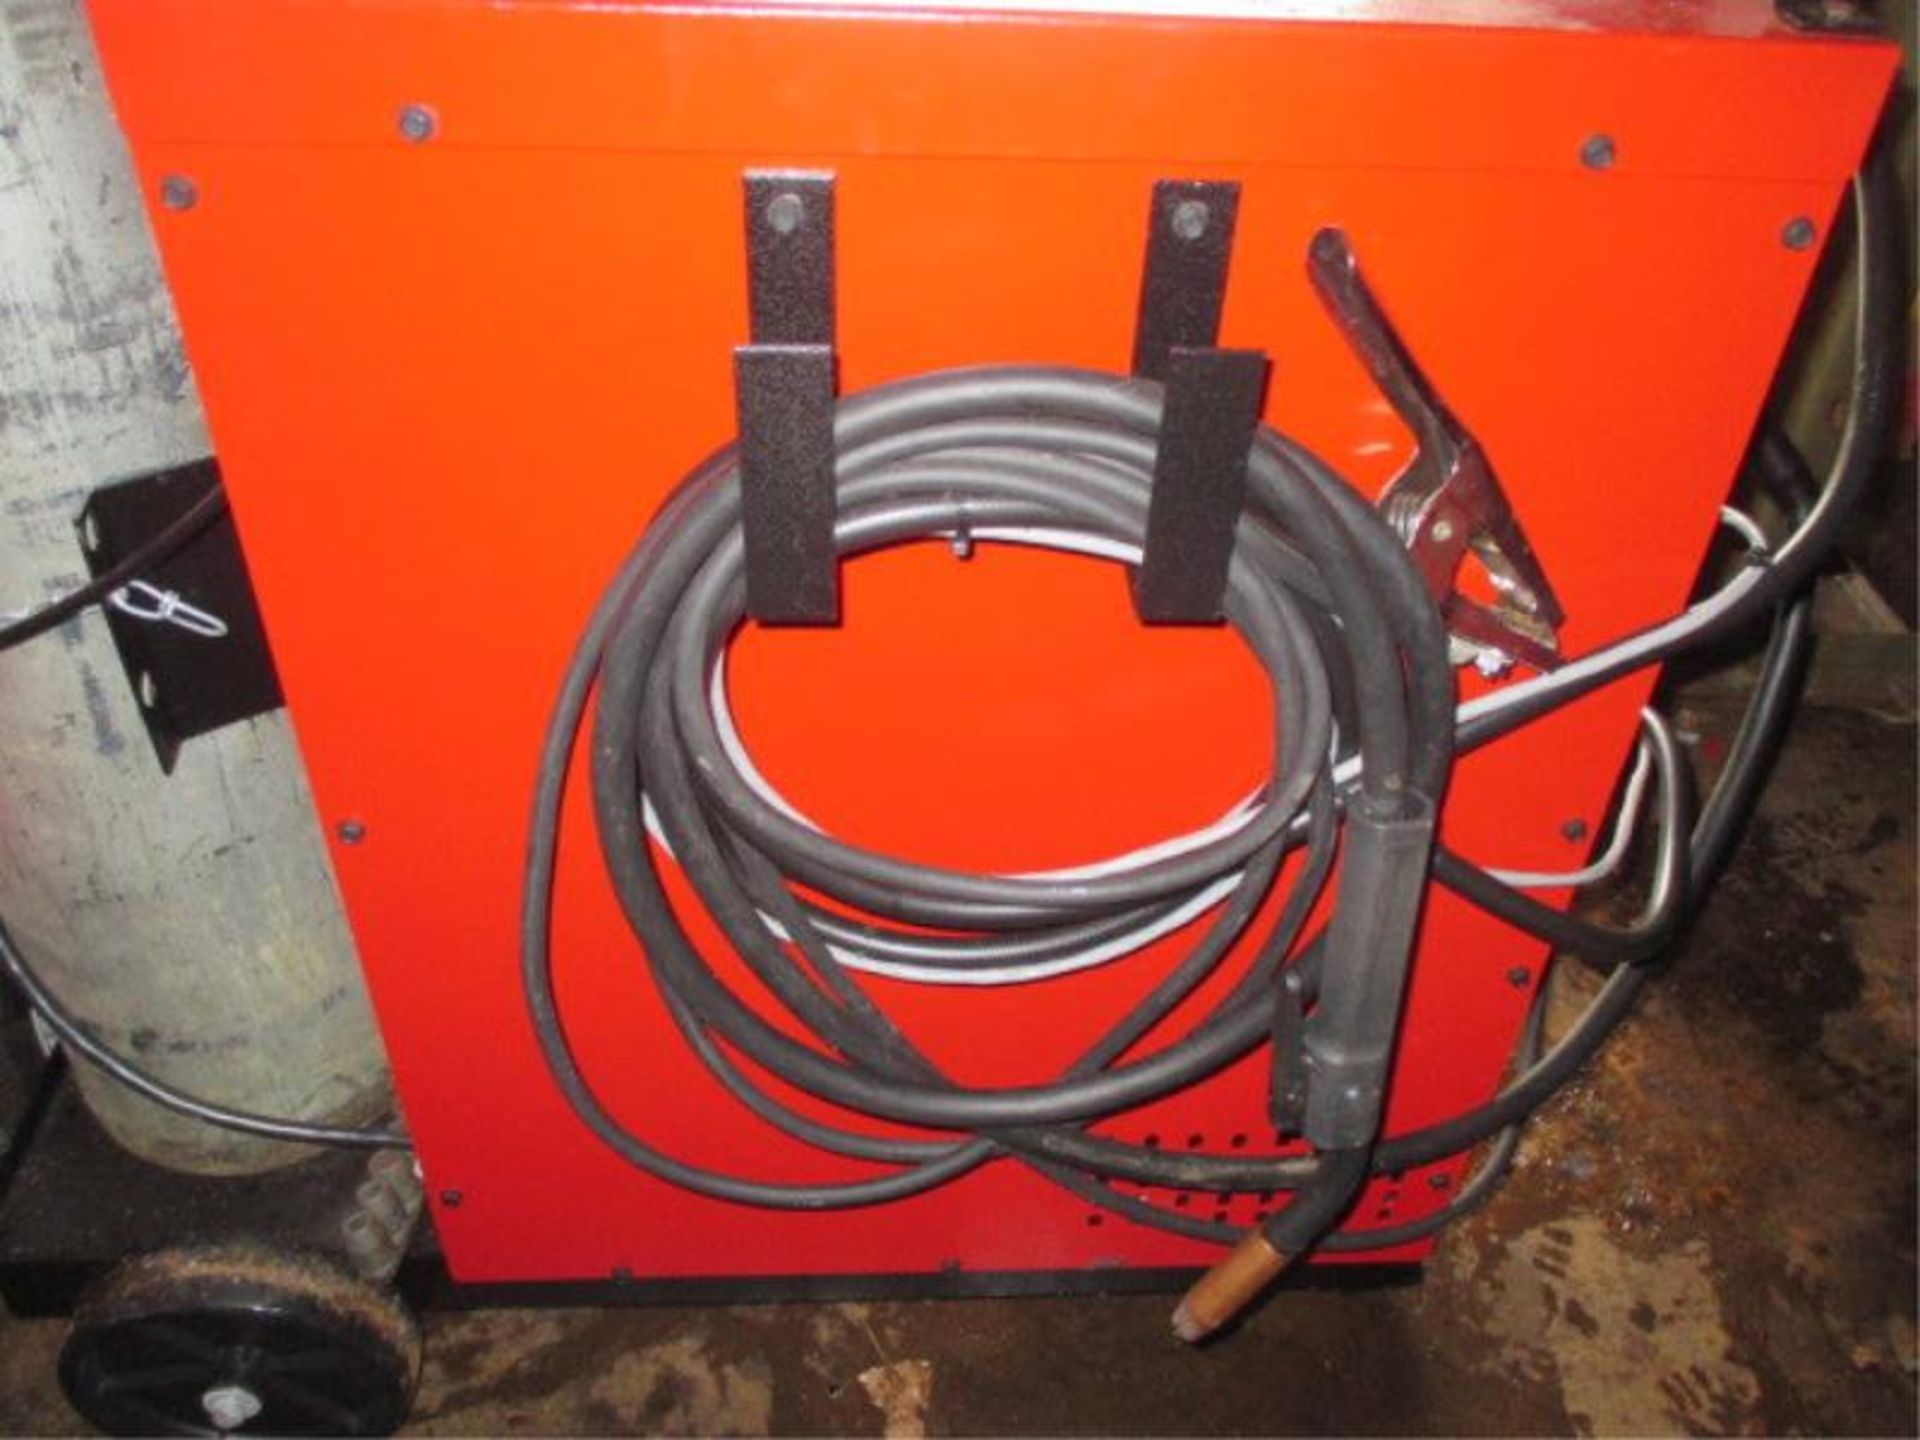 Snap-On Muscle Mig Welding System, Model: MM 250SL, SN: MM250SL-33307, Pri. Voltage AC - 208/230, - Image 10 of 11